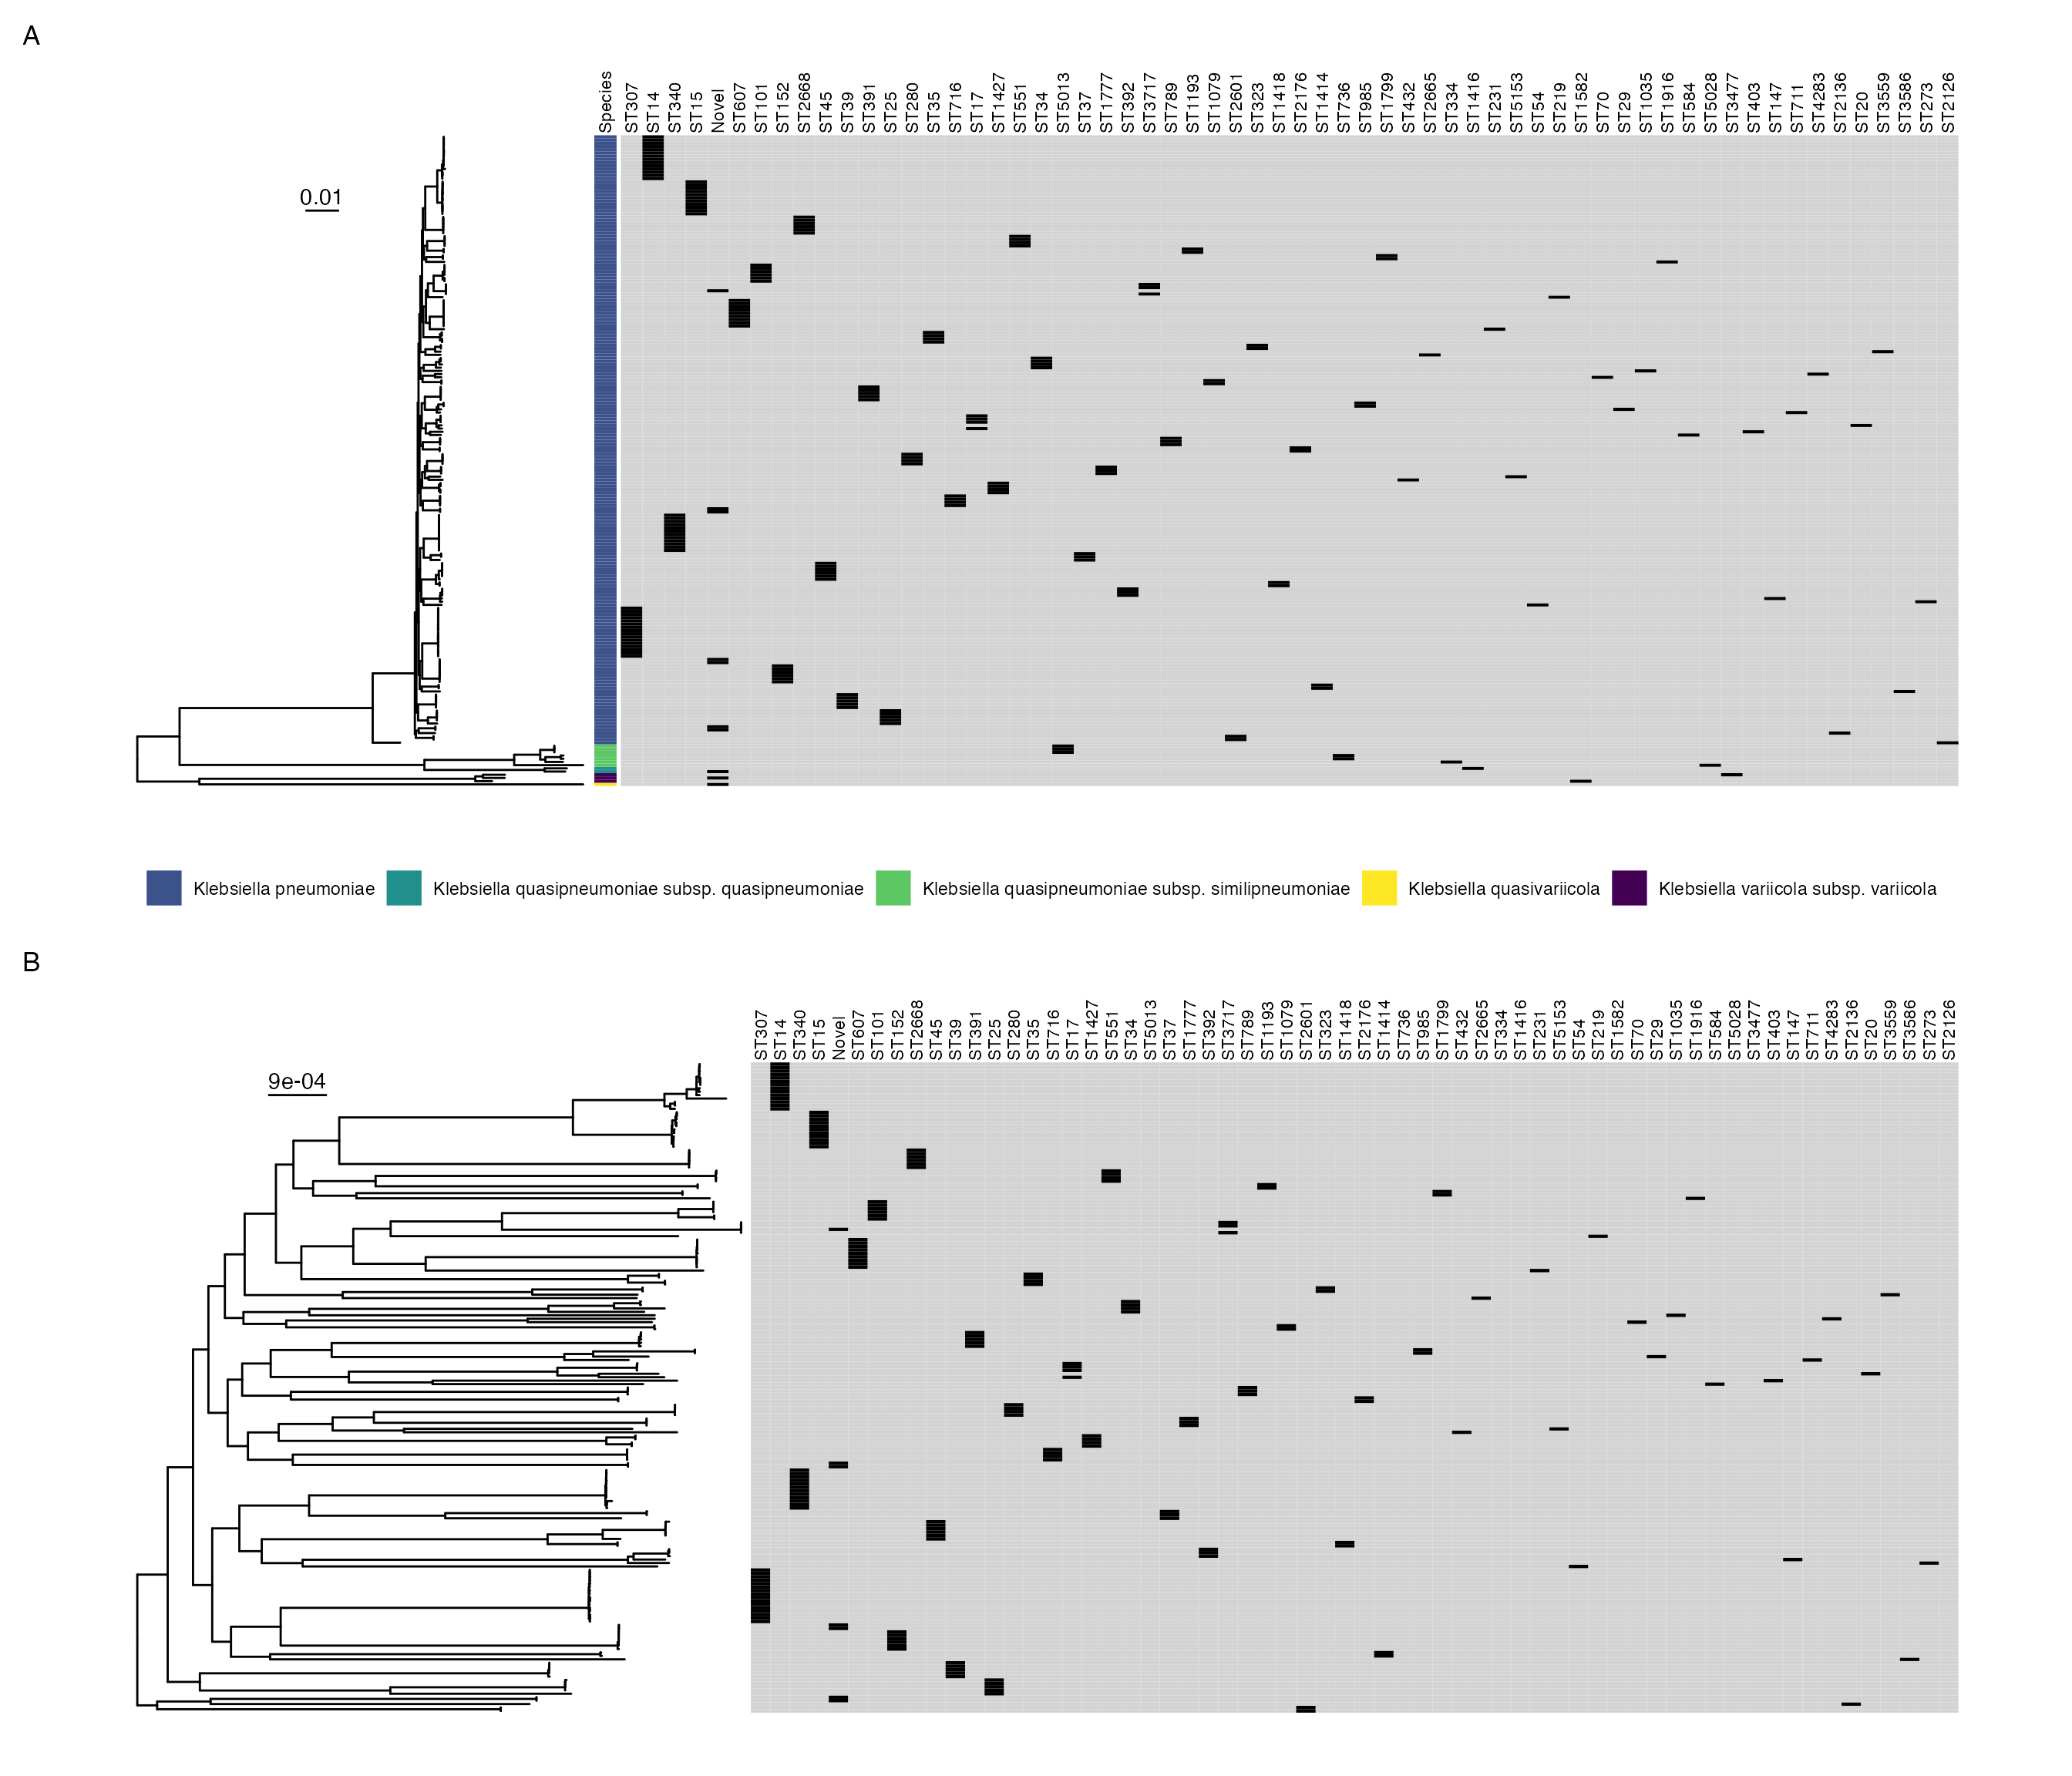 Midpoint-rooted maximum likelihood core gene phylogeny for all samples in collection (A) and restricted to K. pneumoniae sensu stricto (B) showing chromasomal sequence types where black indicates presence and grey absence.